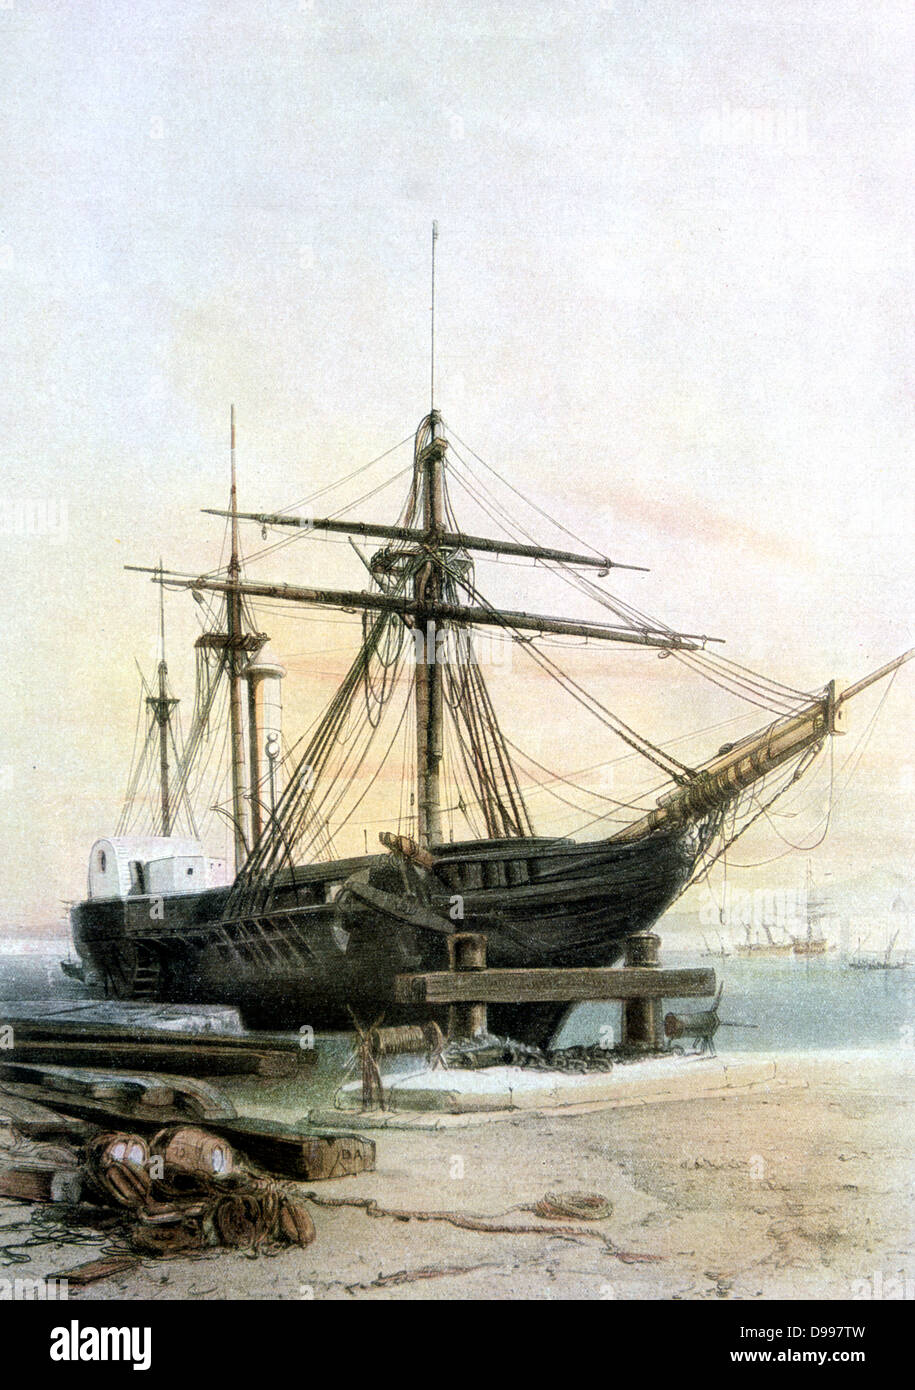 Wooden paddle steamer  used on the early French transatlantic lines c1847. During this transitional period, such vessels would still have a full complement of sail.  Transport, Marine Stock Photo